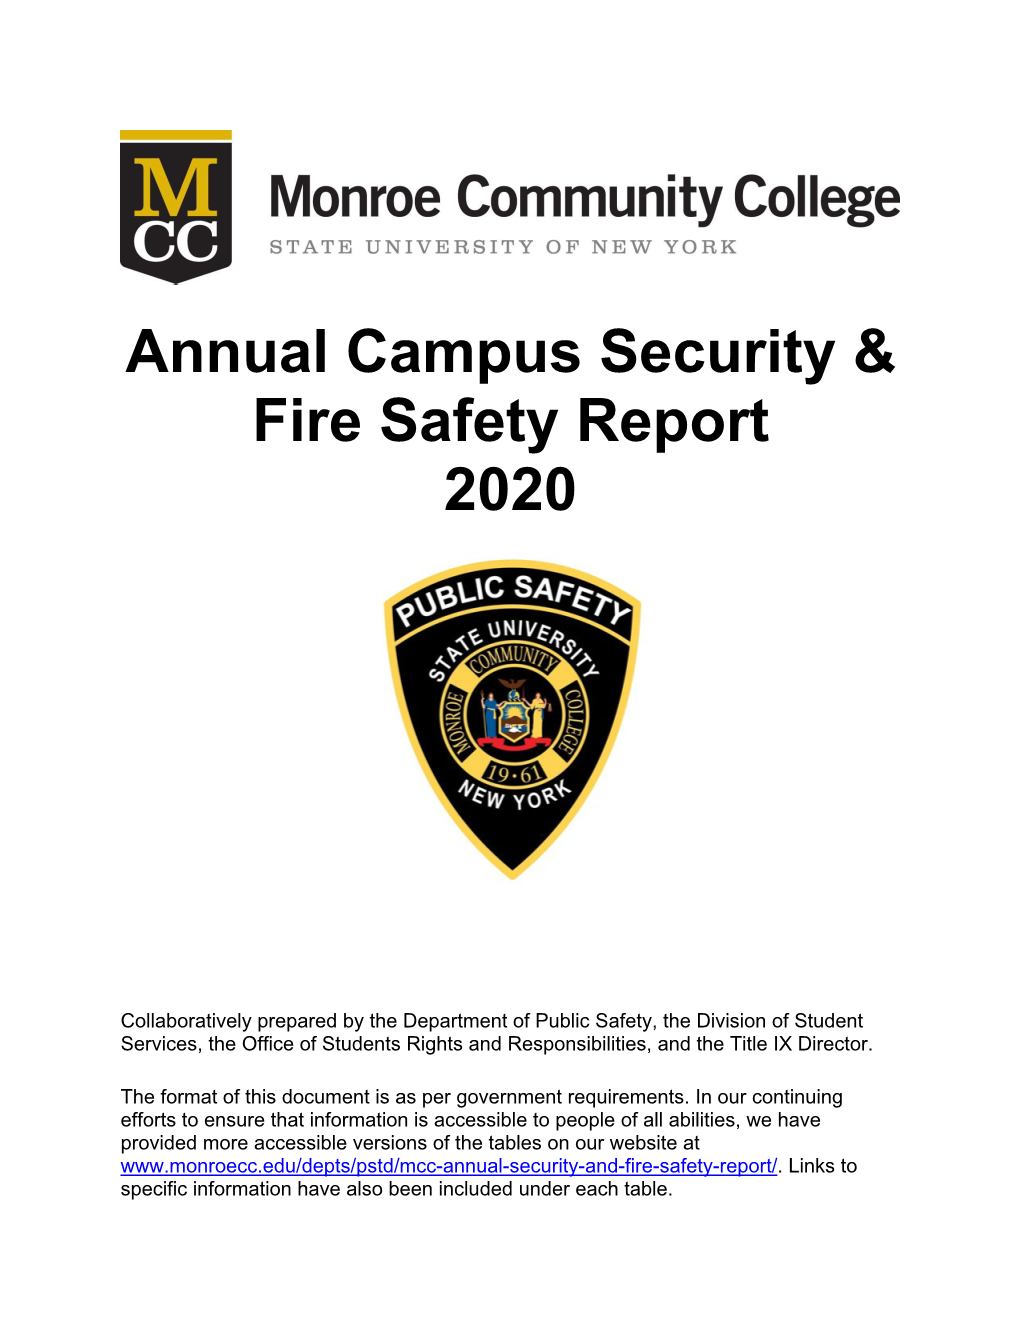 Annual Campus Security & Fire Safety Report 2020